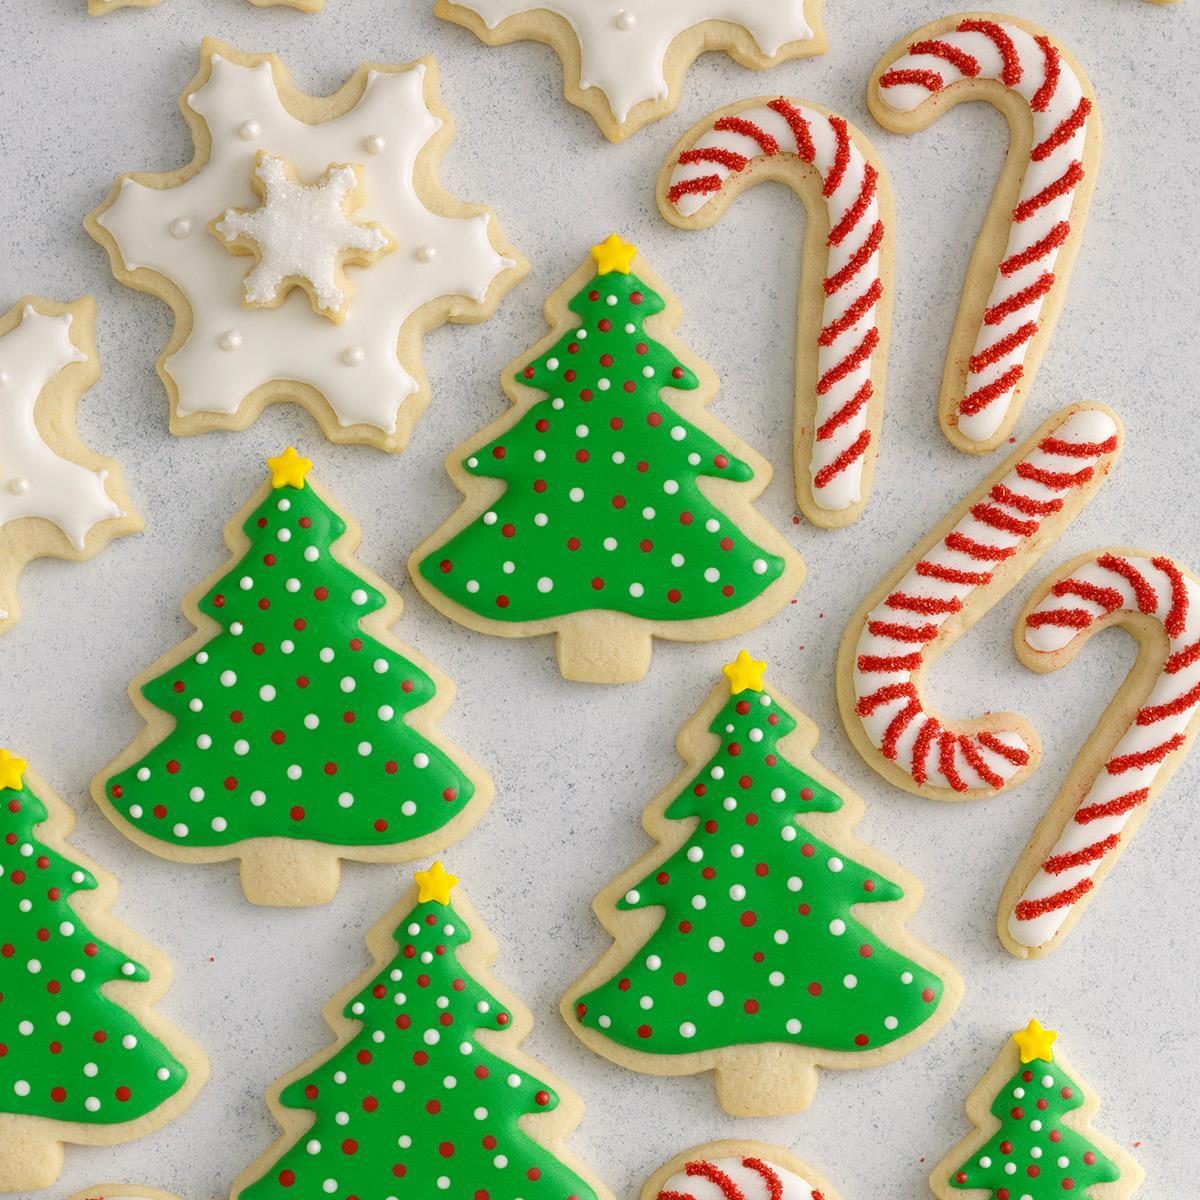 Decorated Christmas Cutout Cookies Recipe | Taste of Home